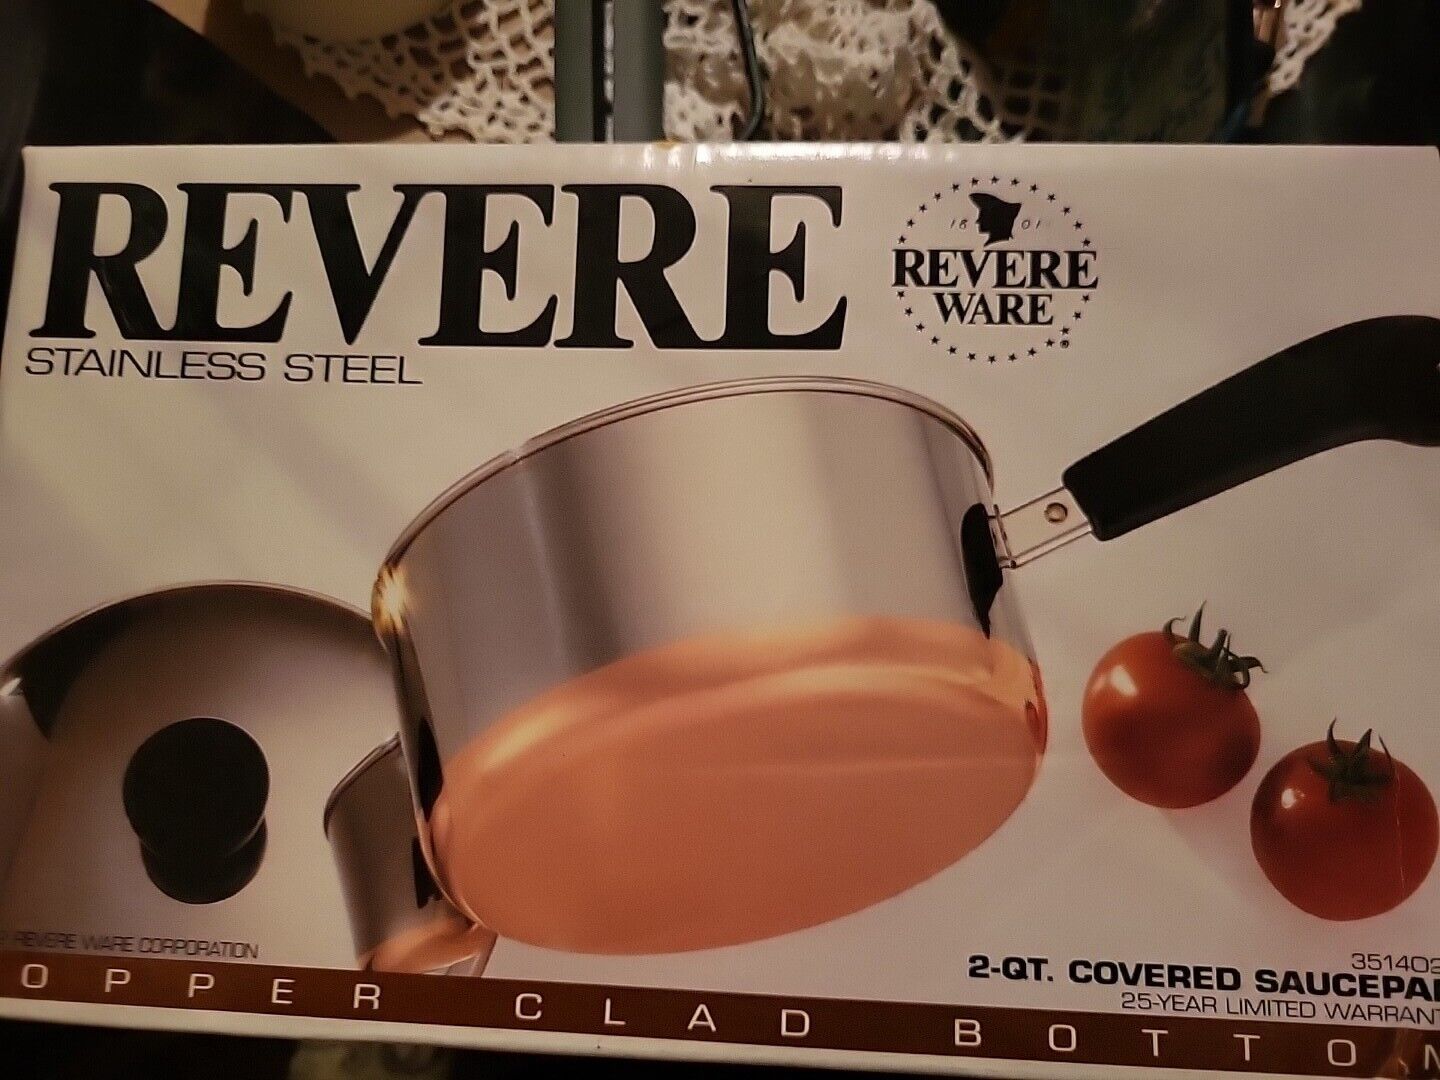 2 Quart Revere Ware Stainless Steel Sauce Pan With Lid New